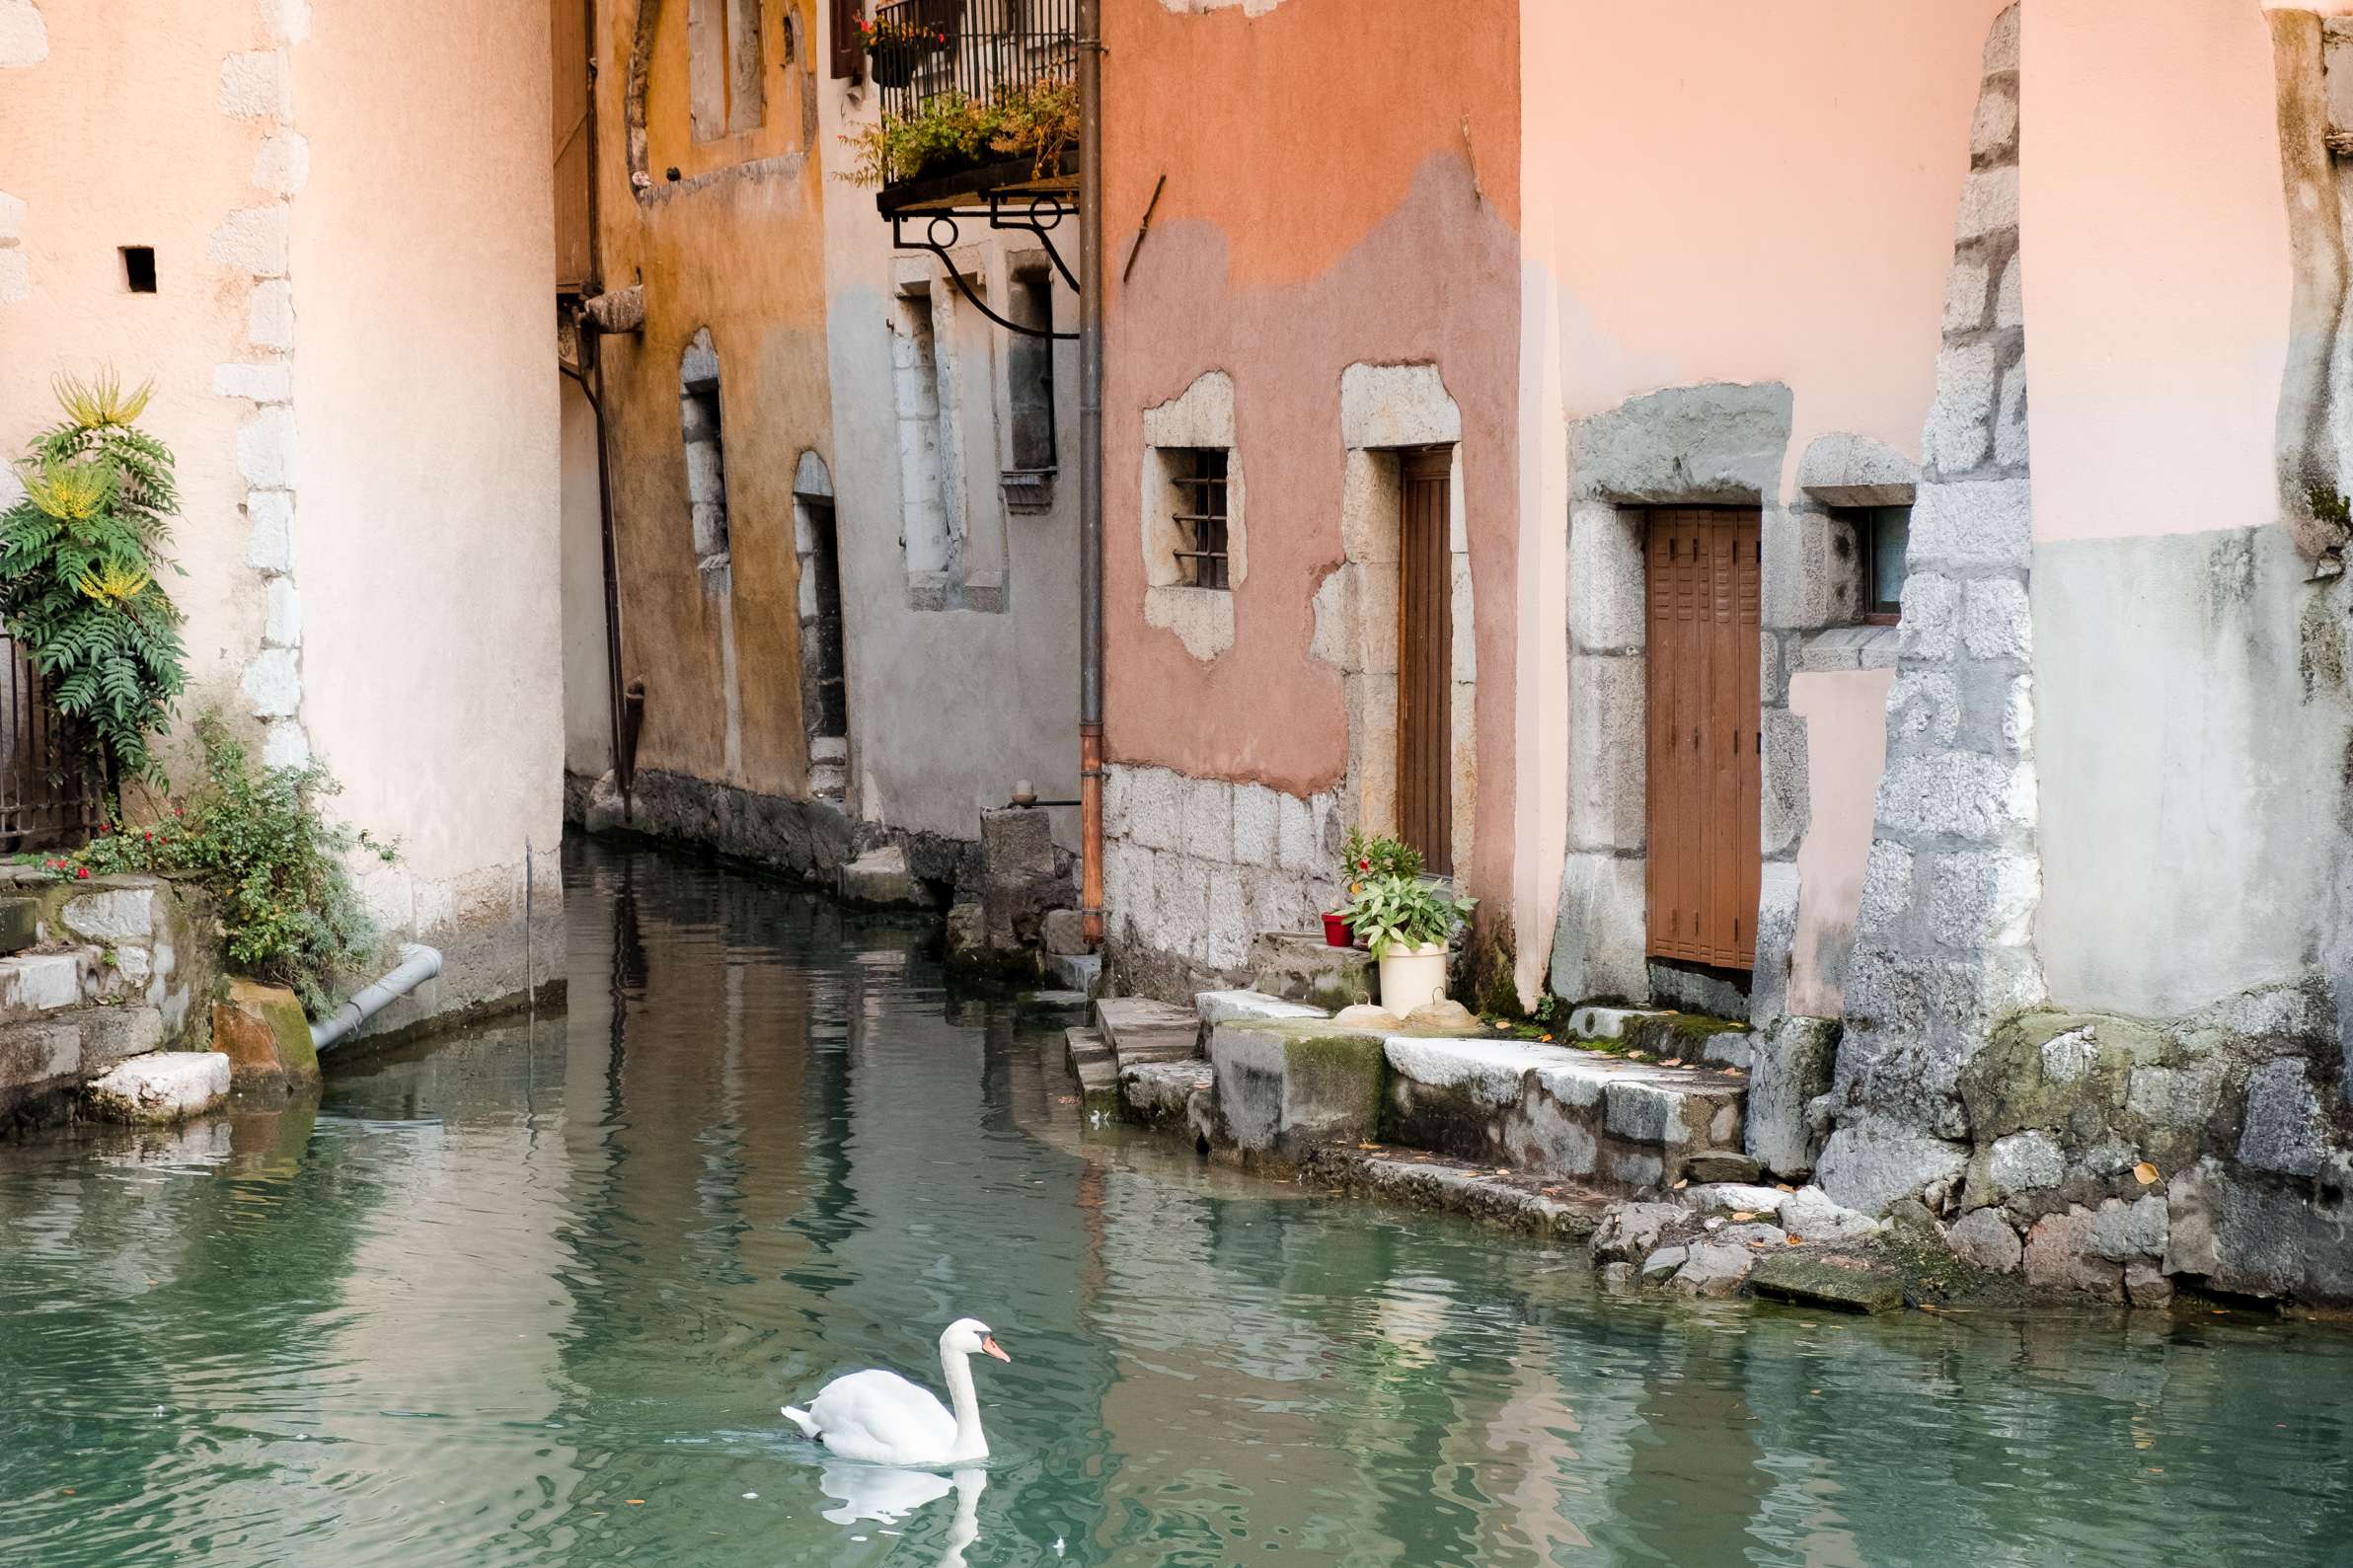 Annecy: lakes, bikes, canals and catastrophes